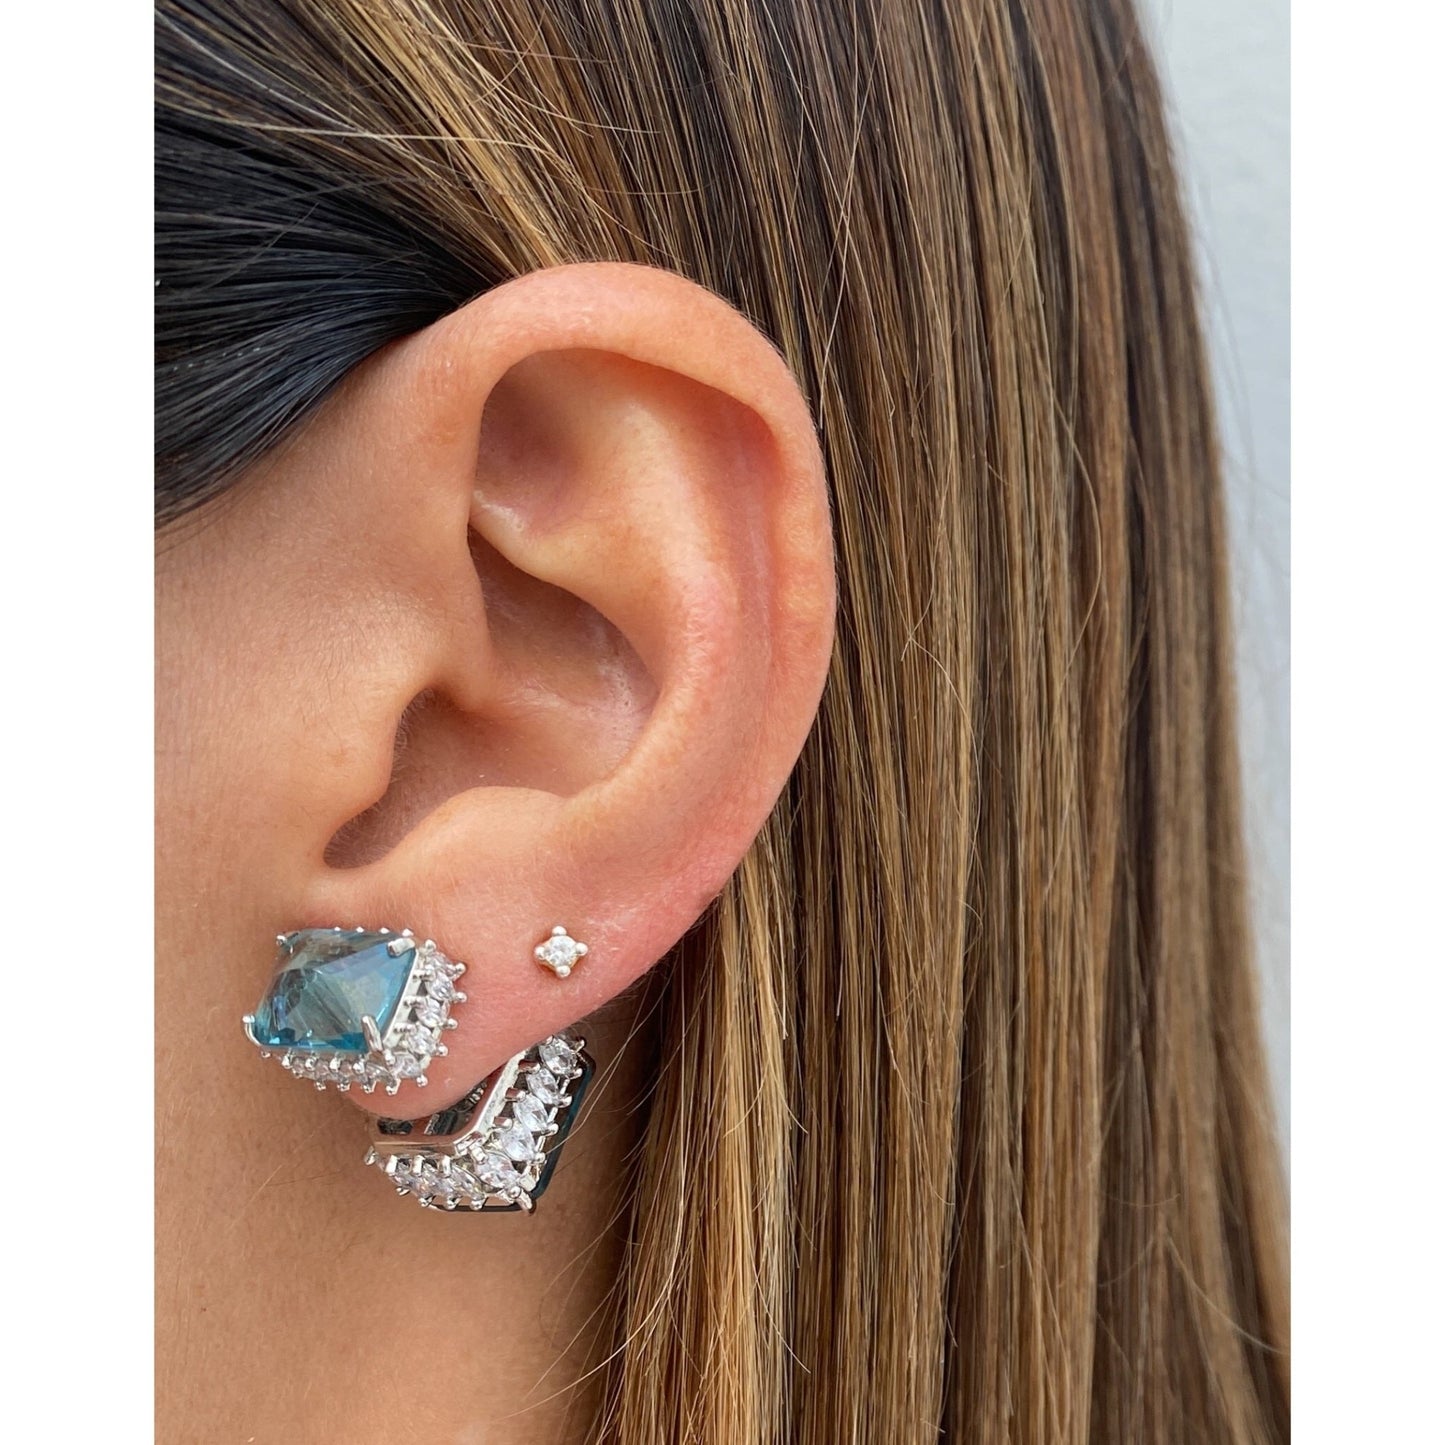 Aretes ANID ( Double Sided ) - OparinaAretes ANID ( Double Sided )AretesOparinaOparina